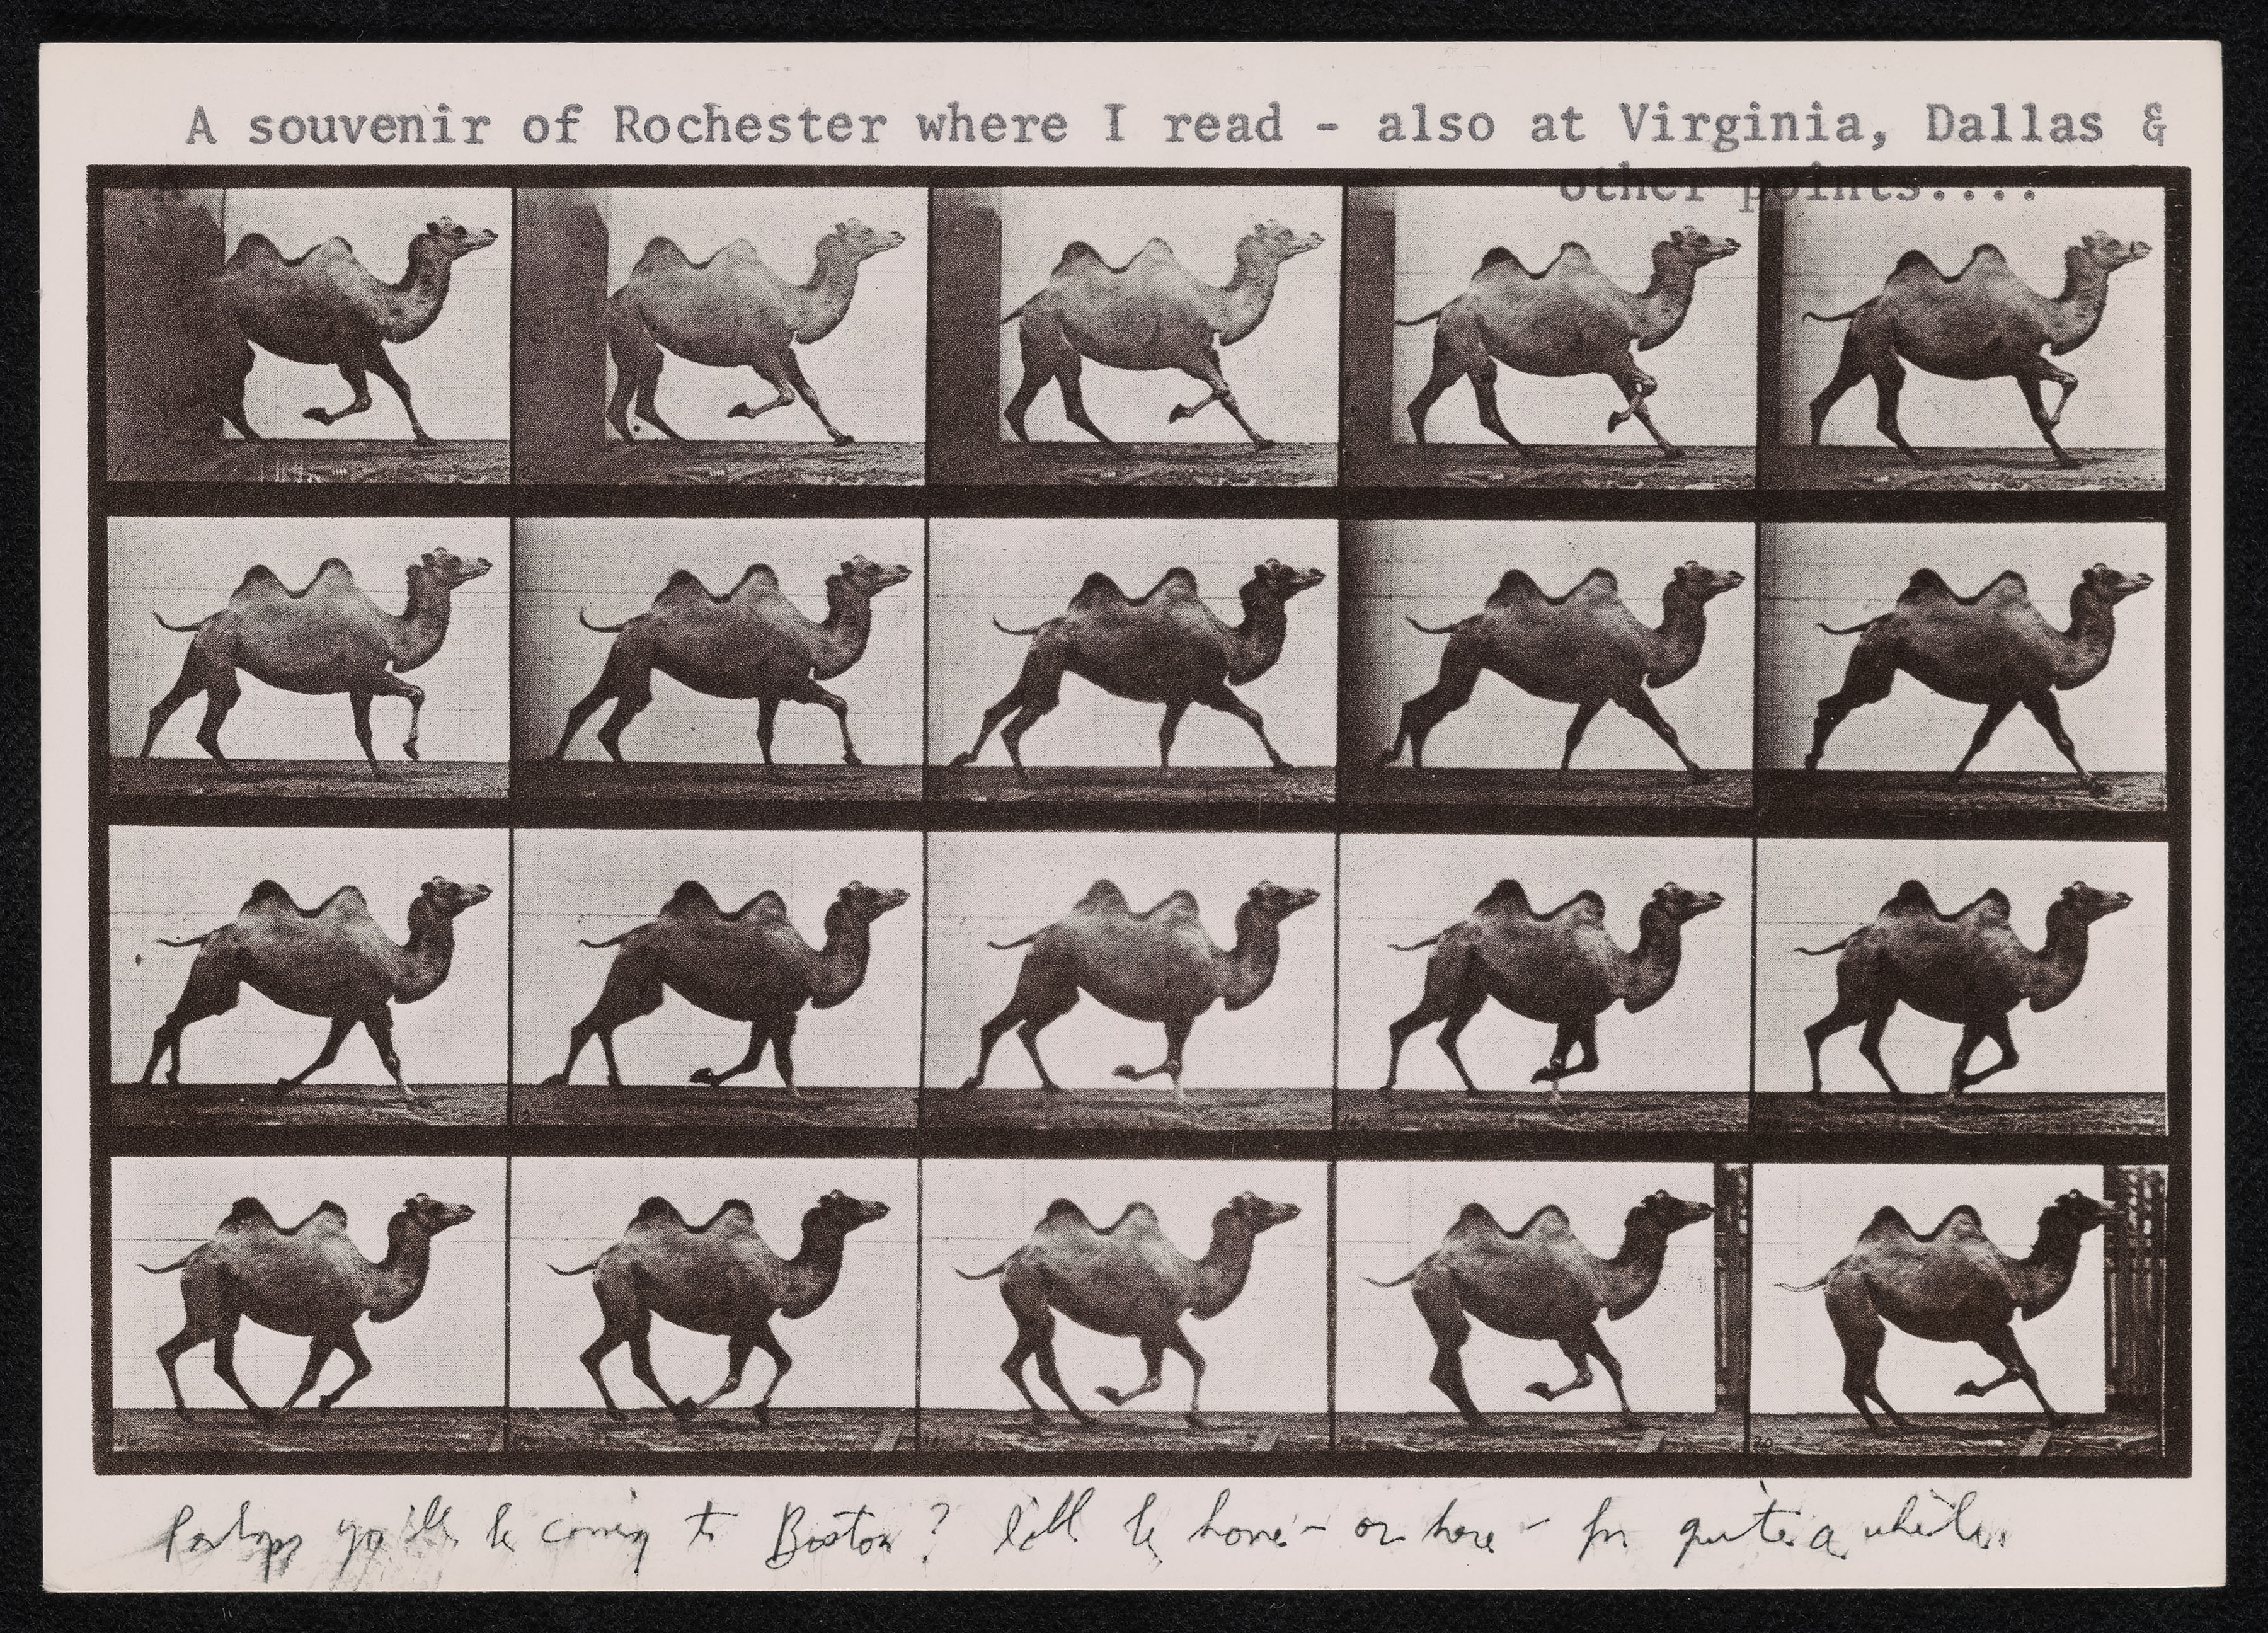 A grid made up of 20 squares that all contain the same image of a camel galloping.